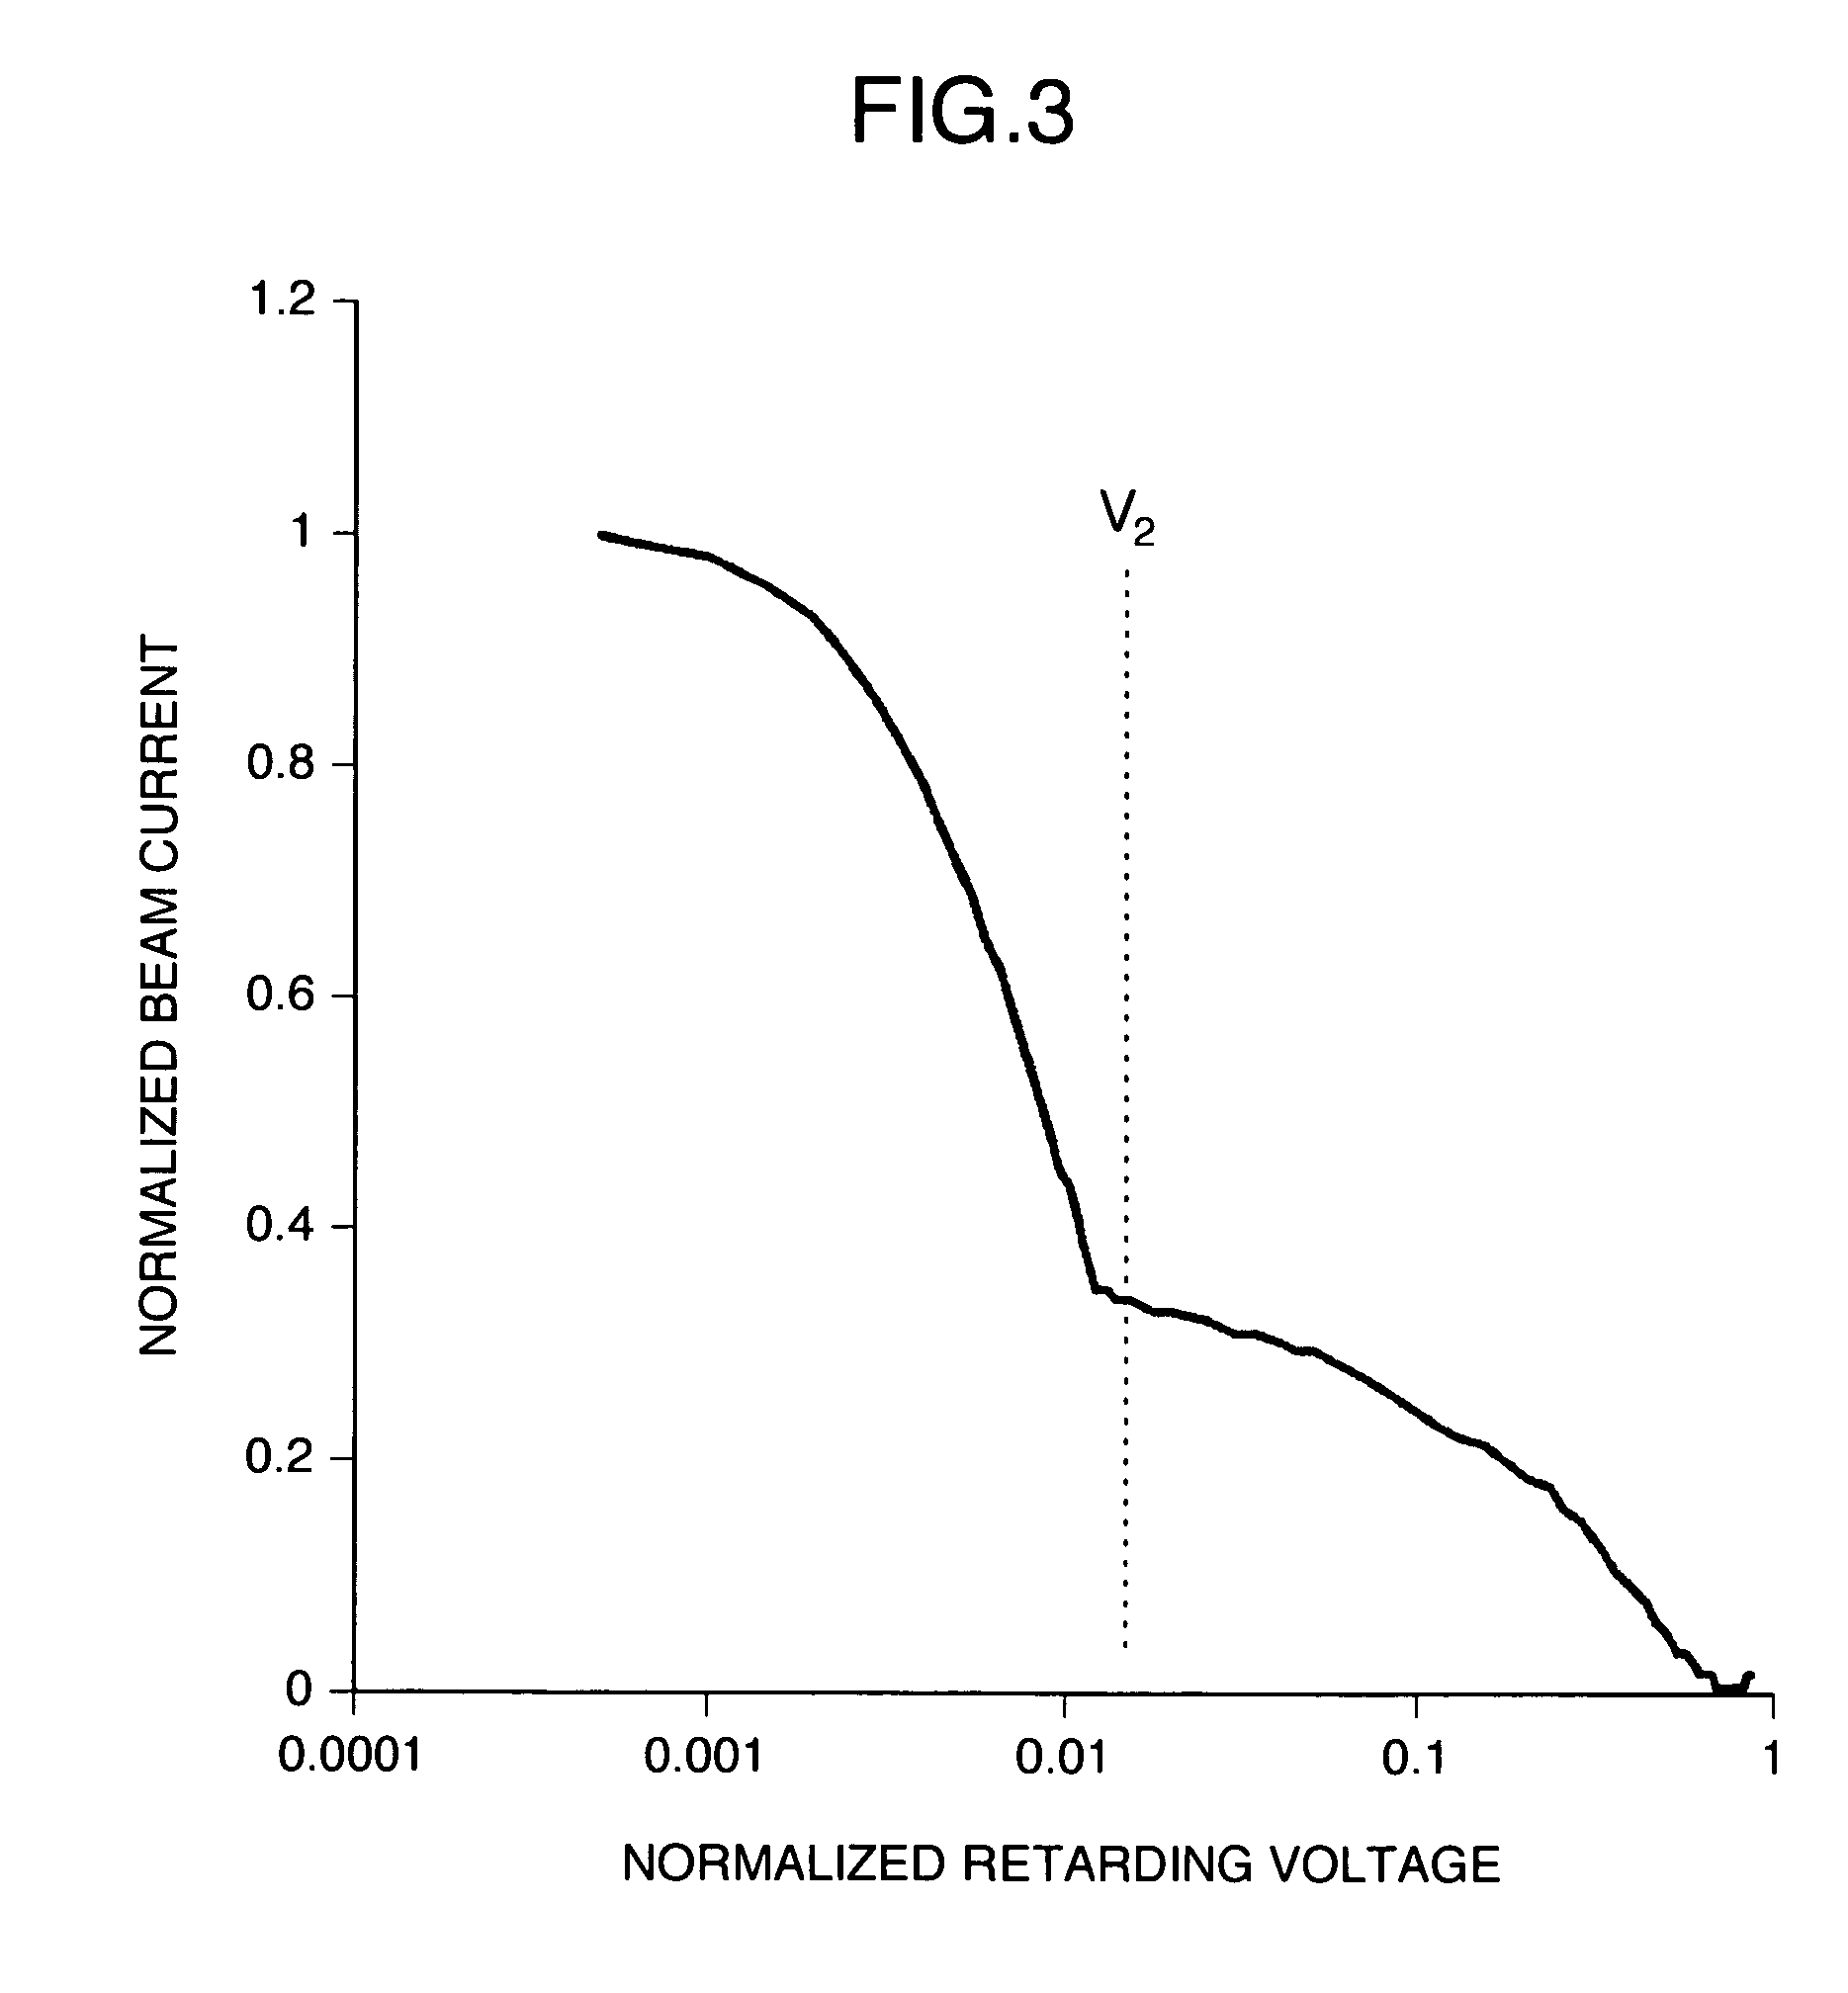 Gas cluster-ion irradiation apparatus